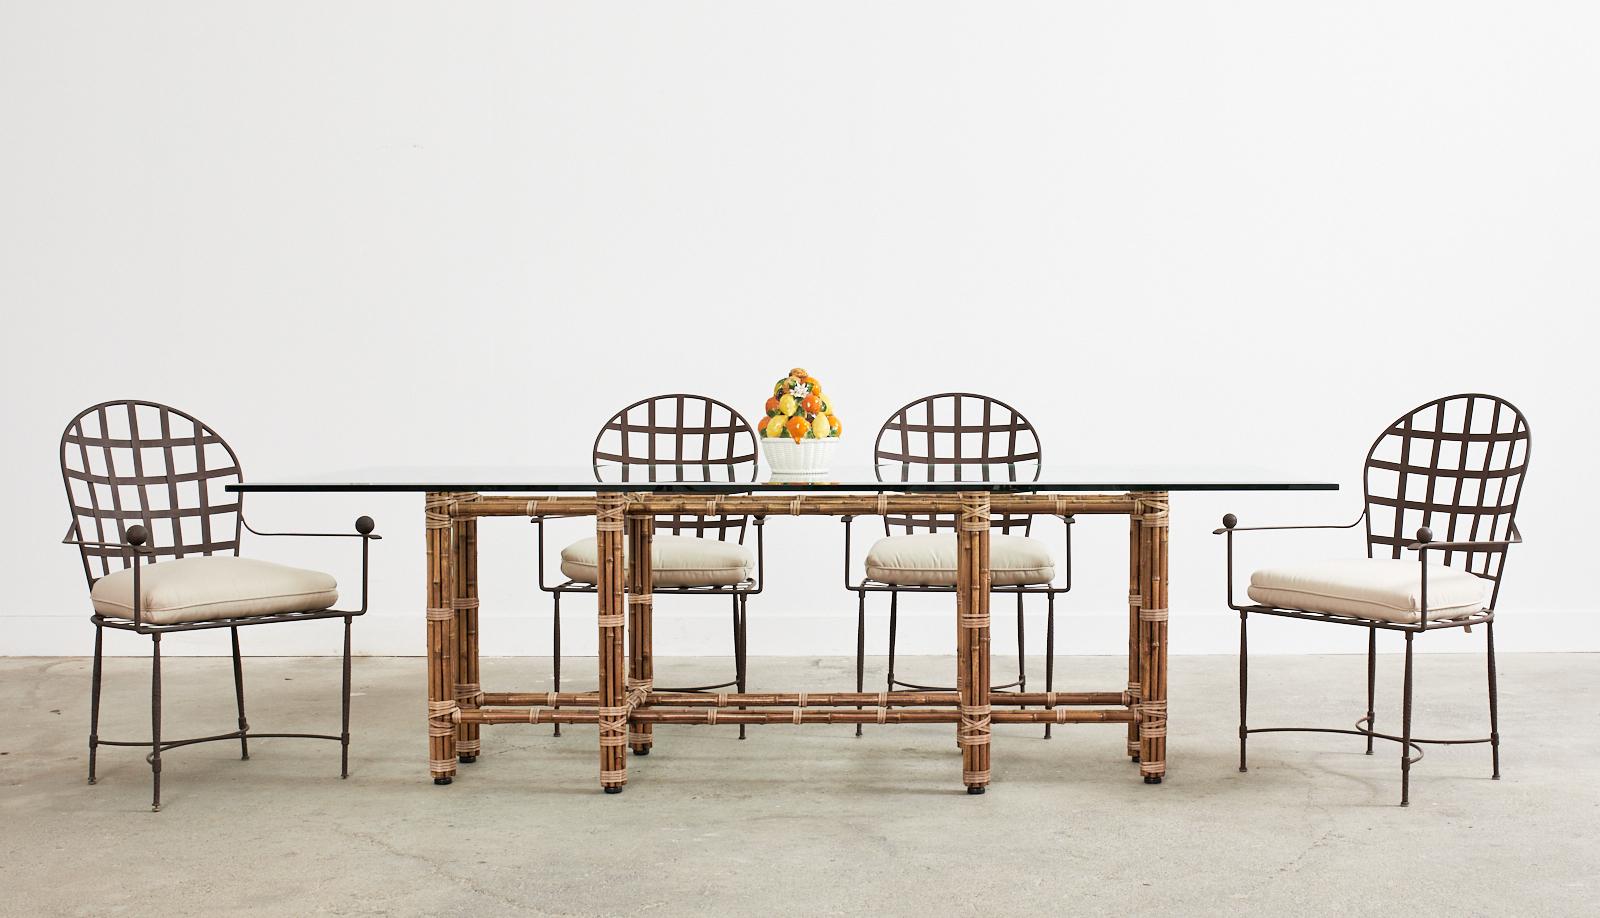 Bespoke monumental McGuire rectangular dining table made in the organic modern style. Authentic, genuine McGuire table with an iron frame painted golden gate orange for authenticity. The frame is wrapped with tobacco toned bamboo poles lashed